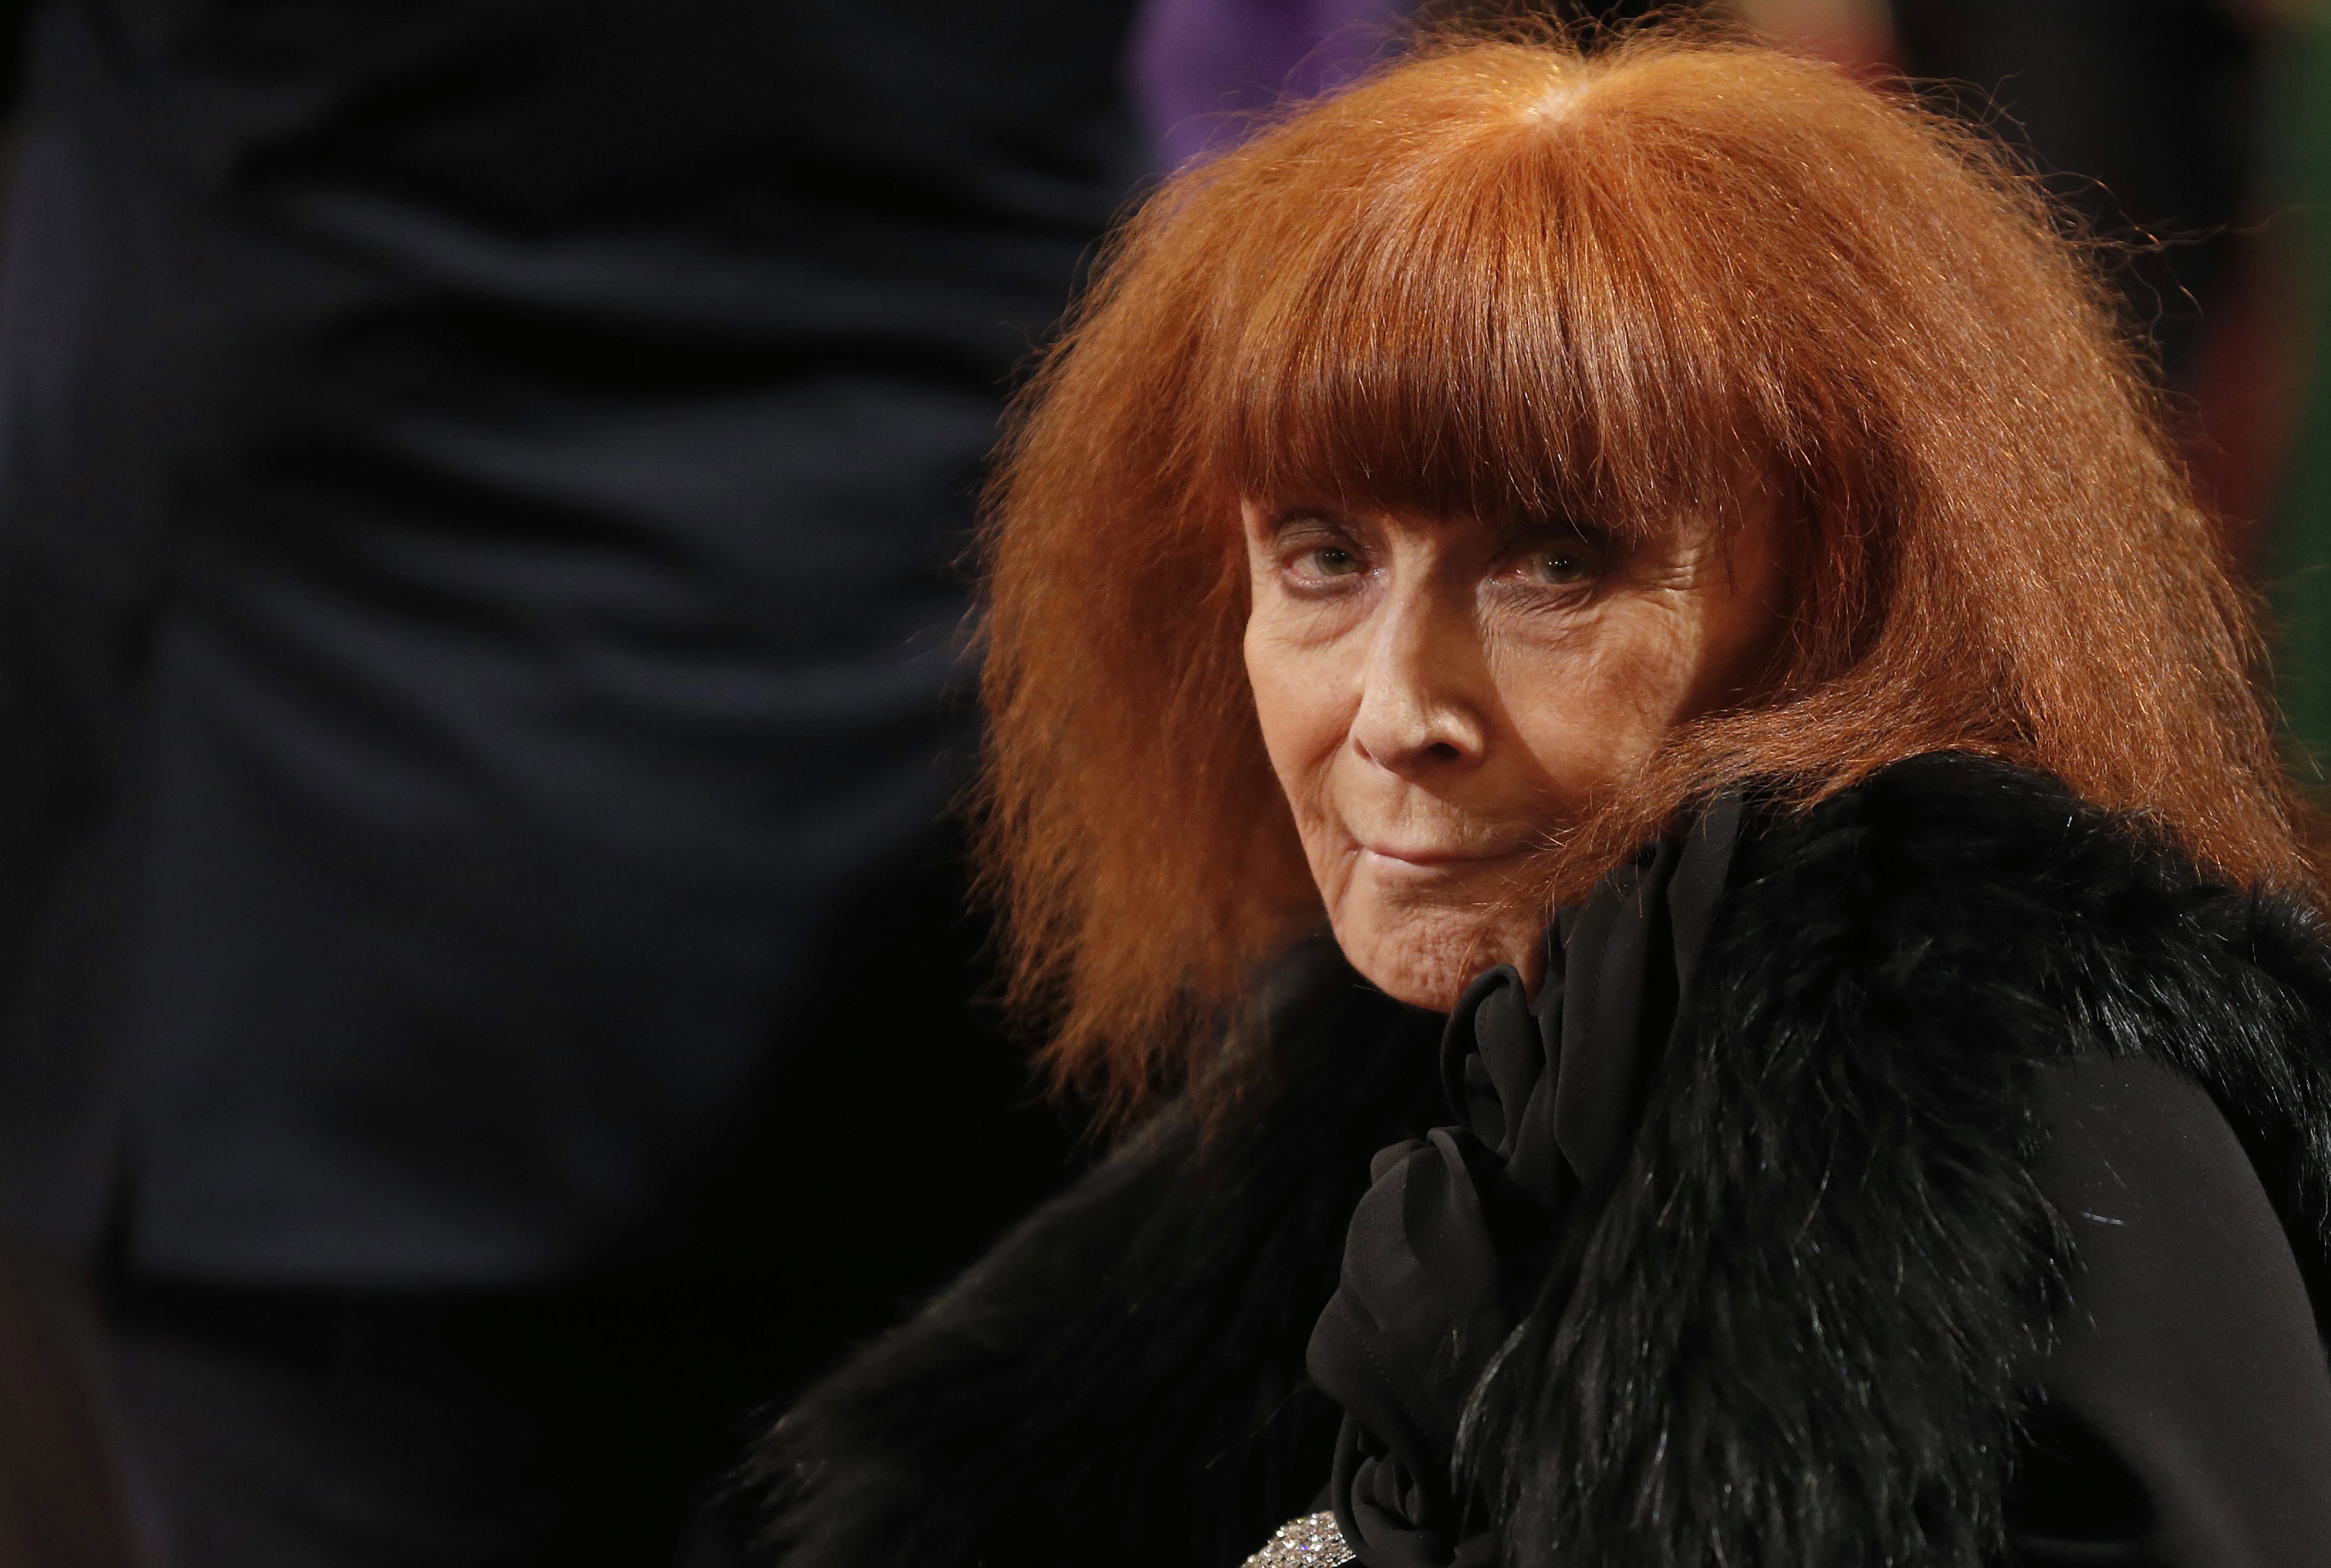 2013-11-26 17:47:39 epa03966378 French designer Sonia Rykiel attends the Legion of Honor ceremony at the Elysee Palace in Paris, France, 26 November 2013. EPA/CHRISTIAN HARTMANN / POOL MAXPPP OUT